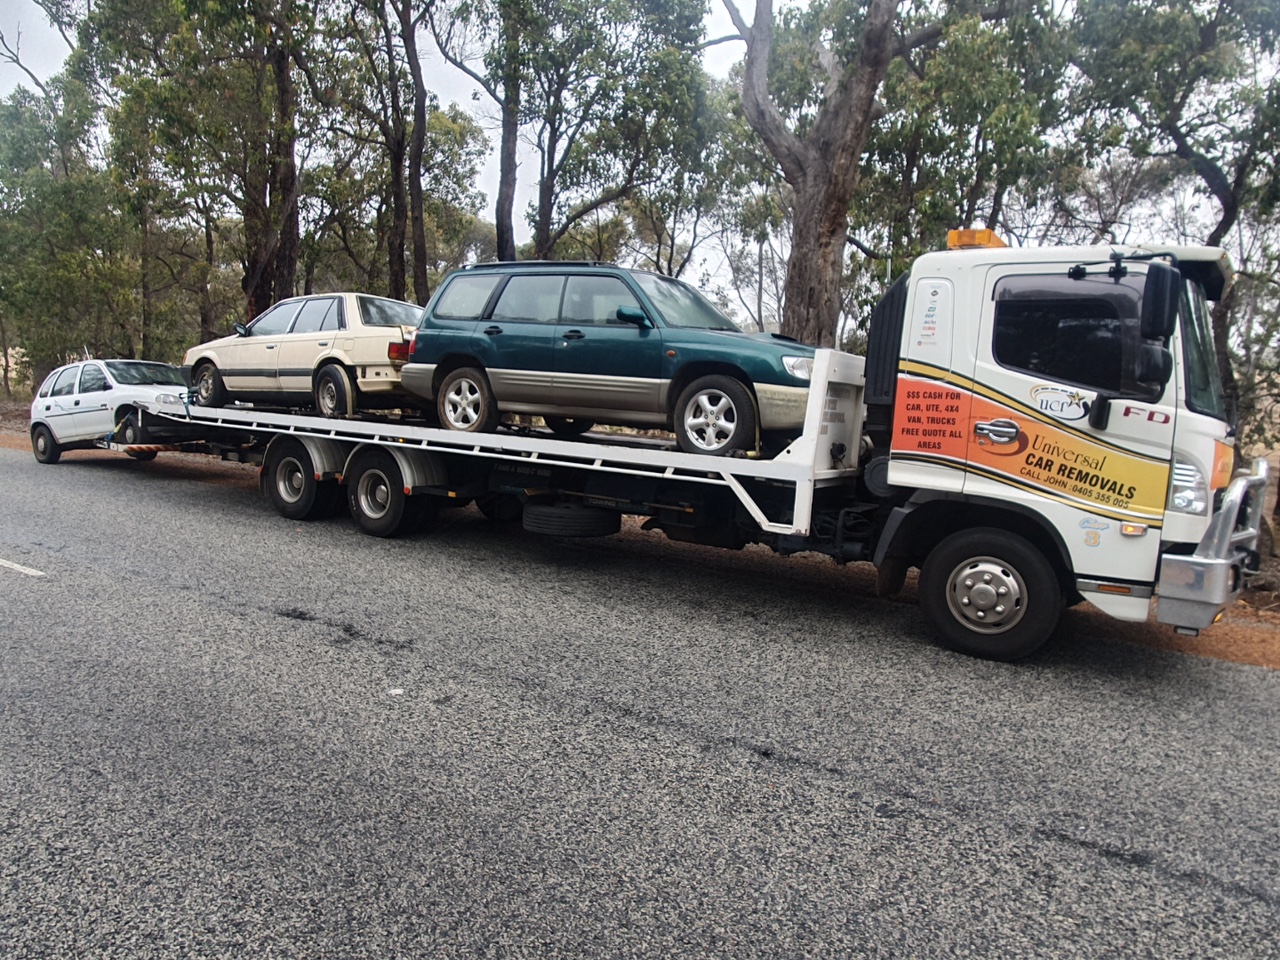 Perth Car Removal and Towing, Truck towing Perth, Car towing Perth, Perth Vehicle towing, Perth Towing, Universal towing car removals Perth, cash for car Perth